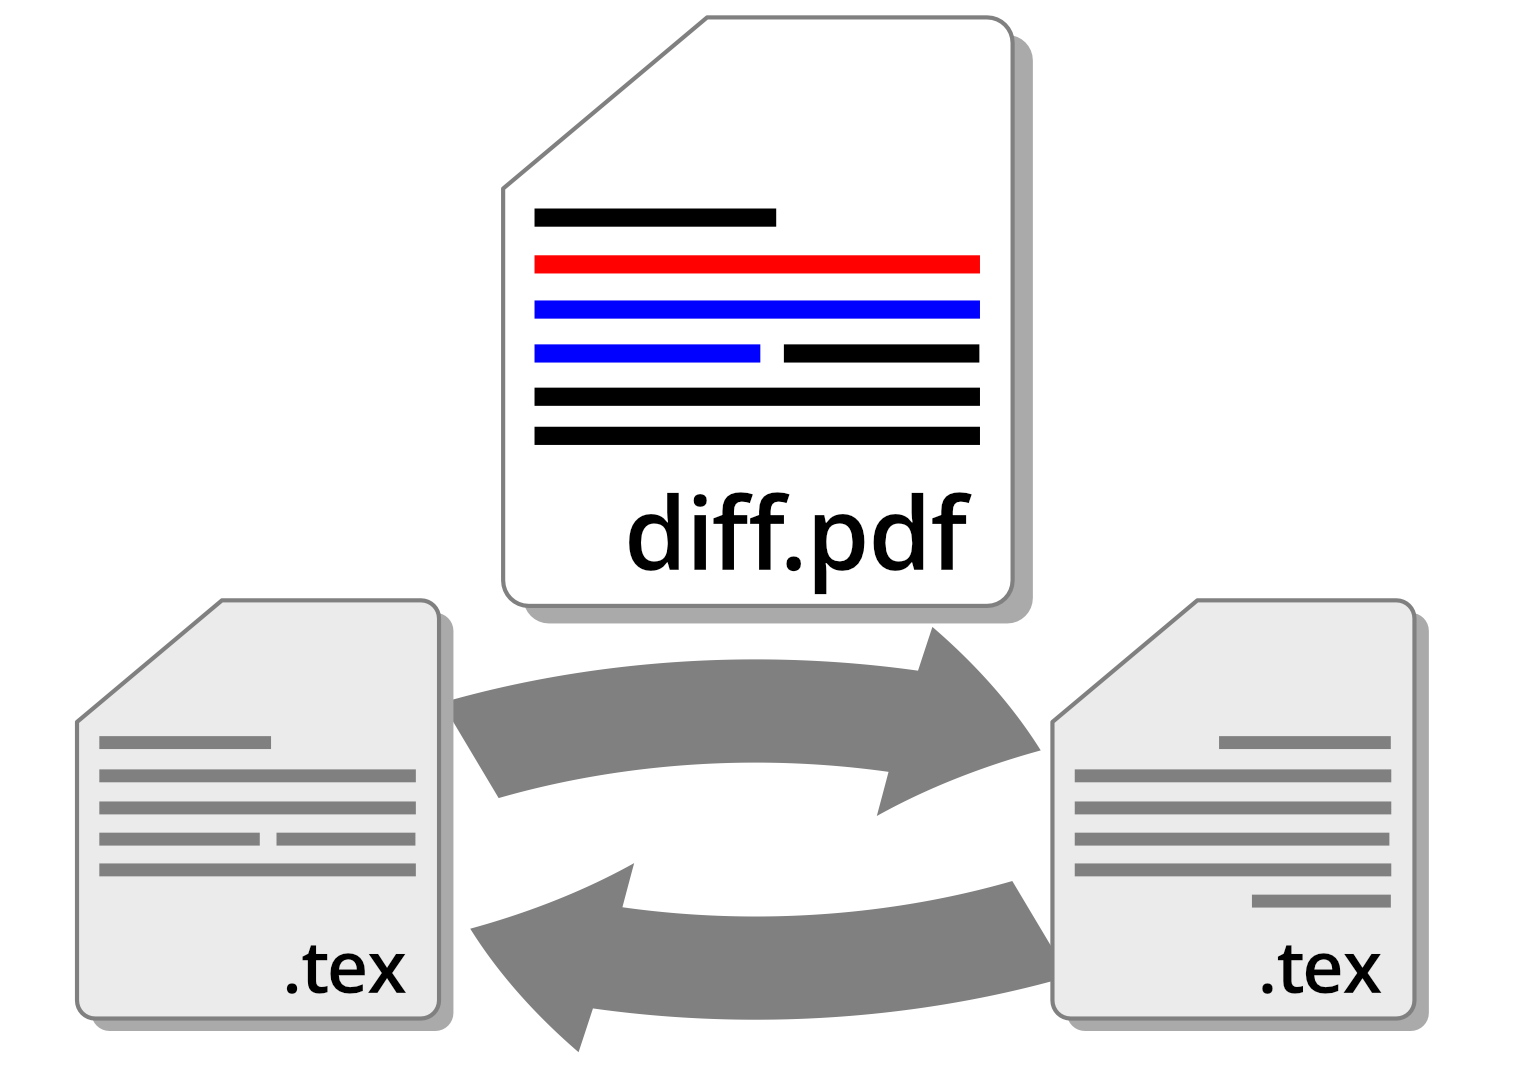 Illustration of a diff file